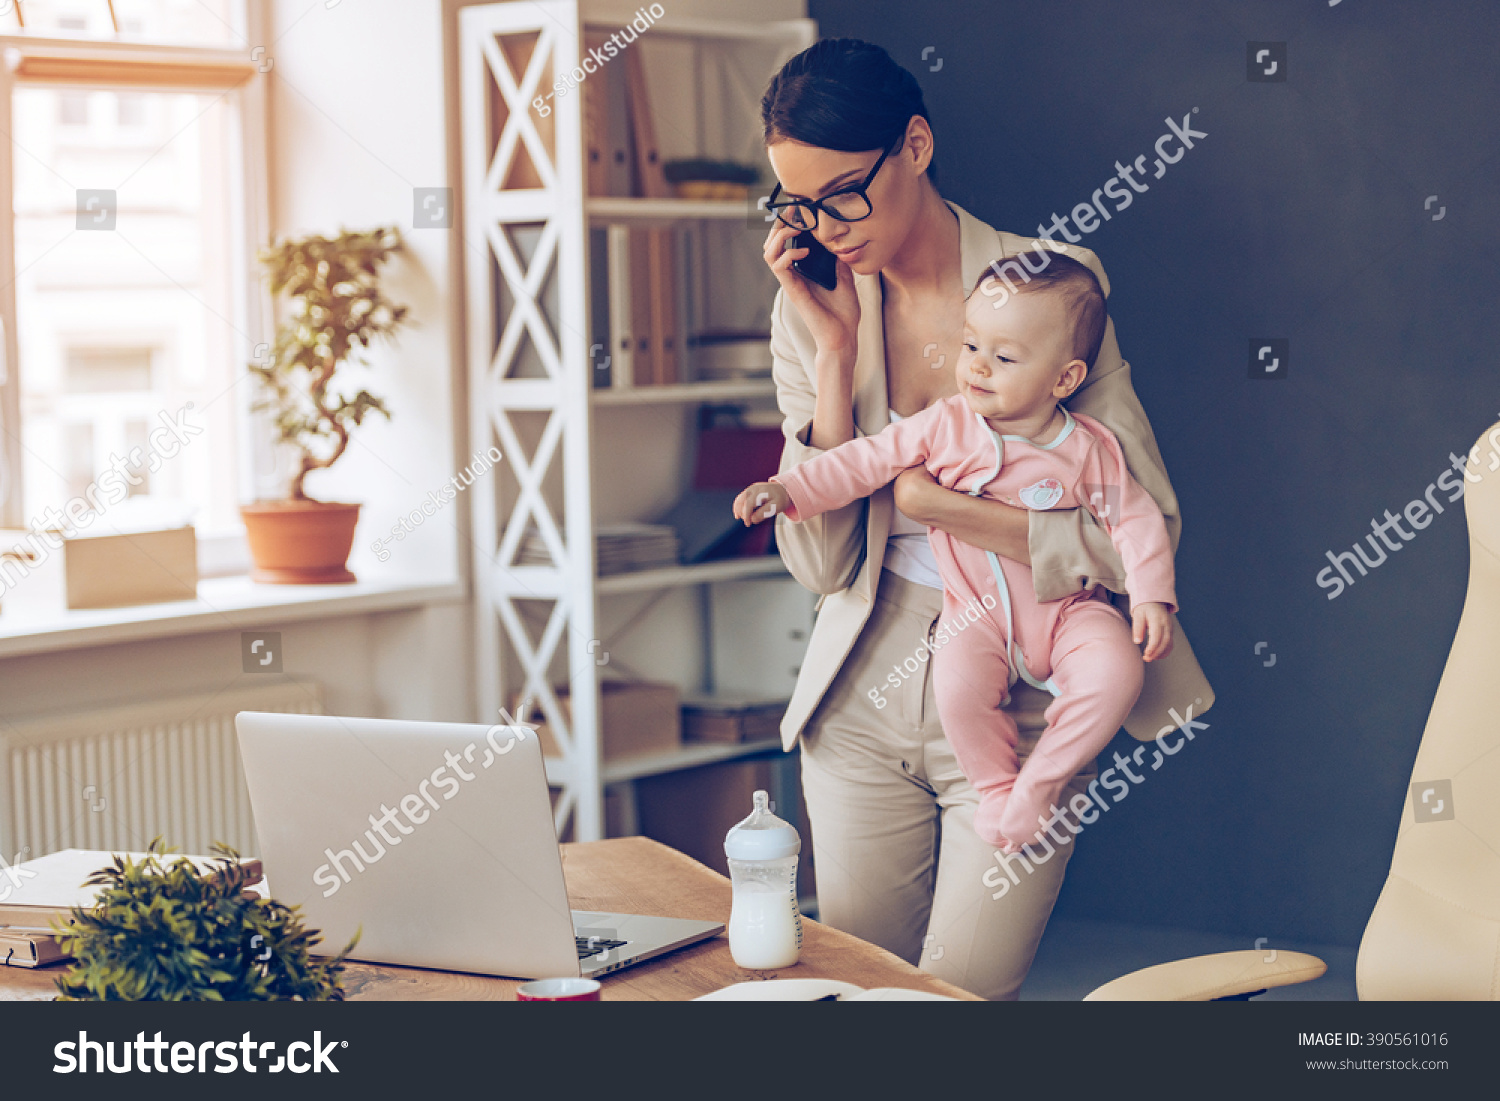 It is not easy to be a working mom! Young beautiful businesswoman talking on mobile phone and looking at laptop while standing with her baby girl at her working place #390561016